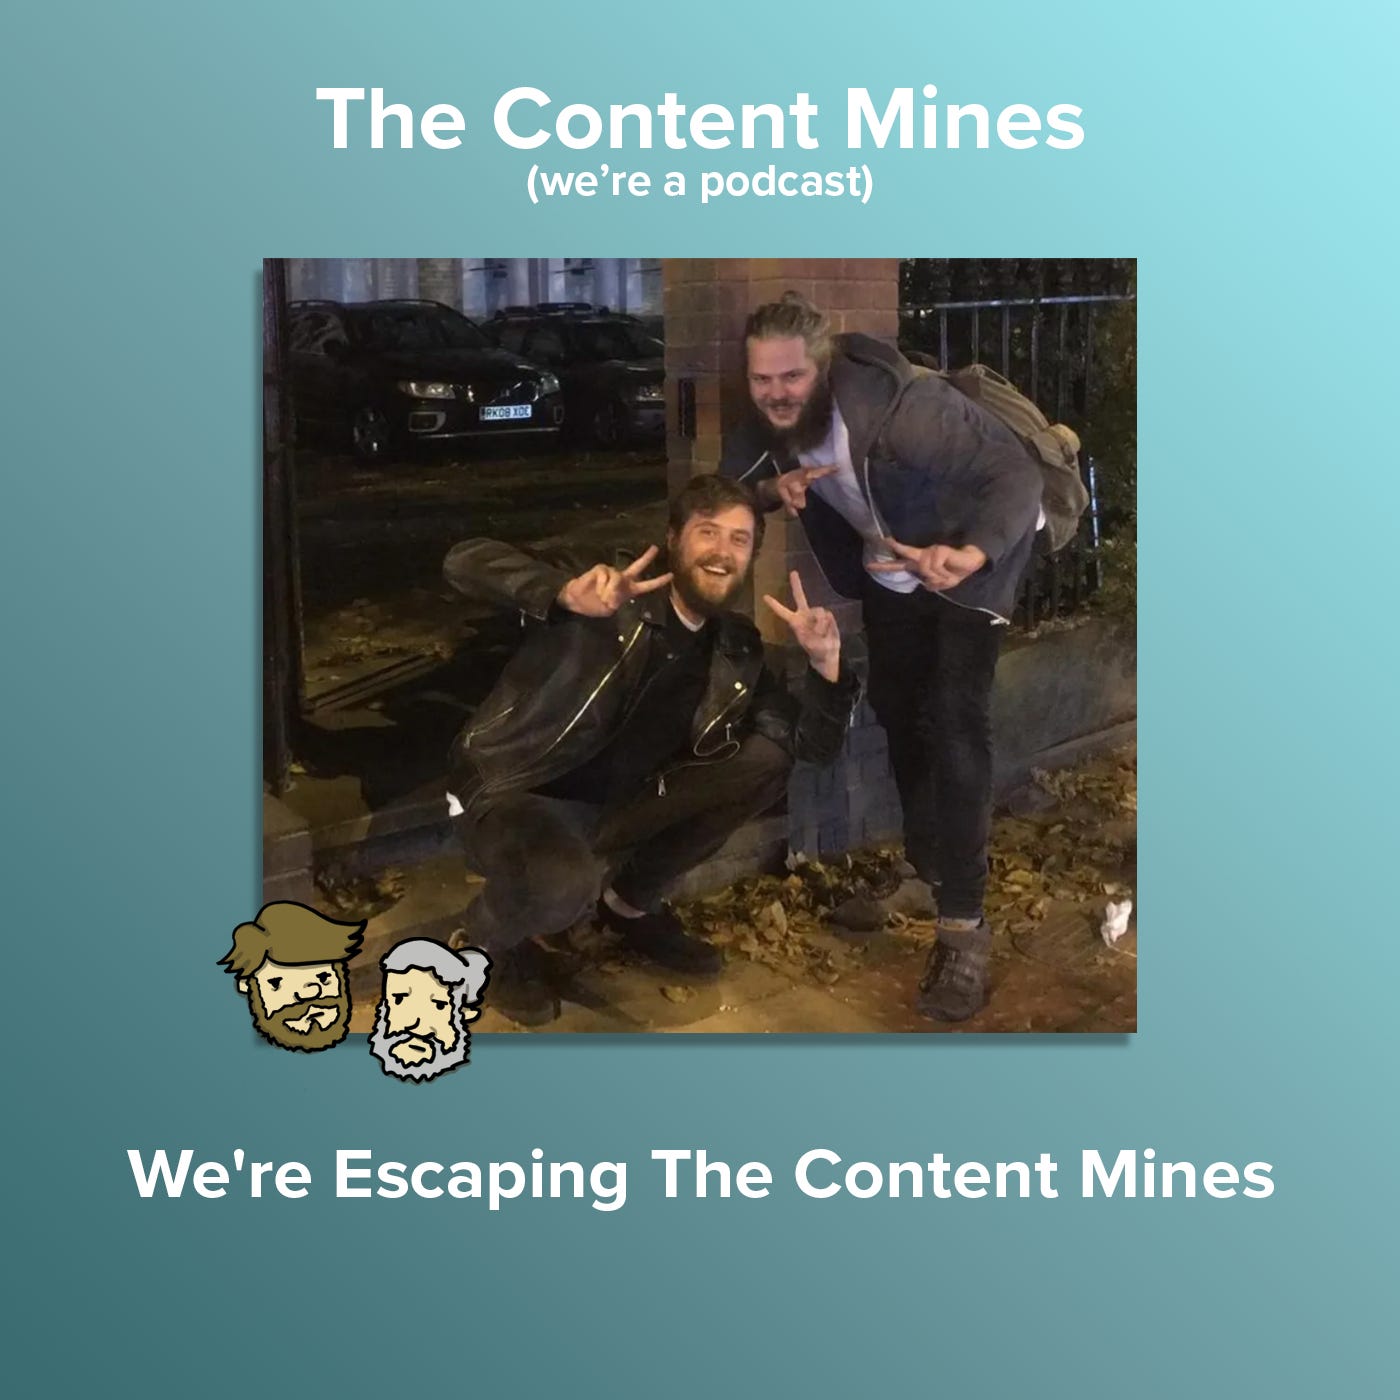 We're Escaping The Content Mines